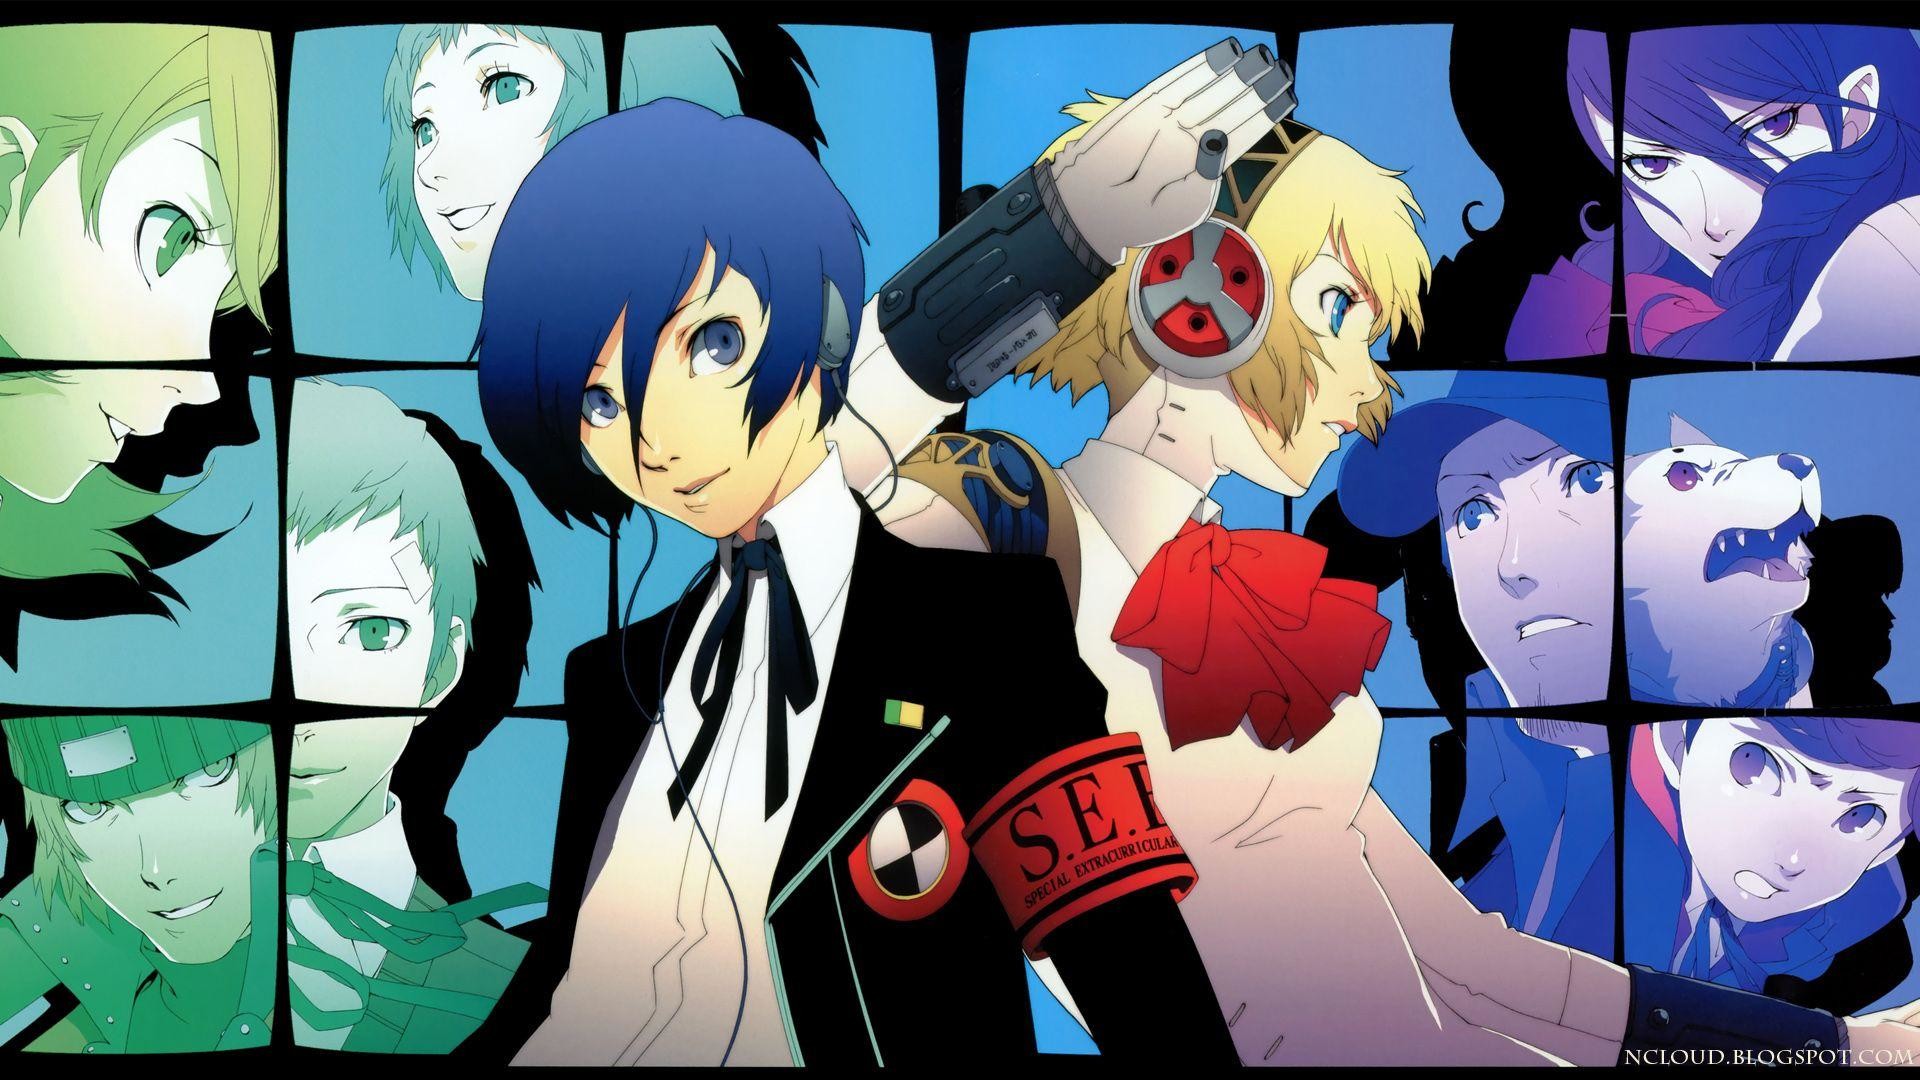 1920x1080 Wallpapers For > Persona 3 Fes Wallpaper Hd